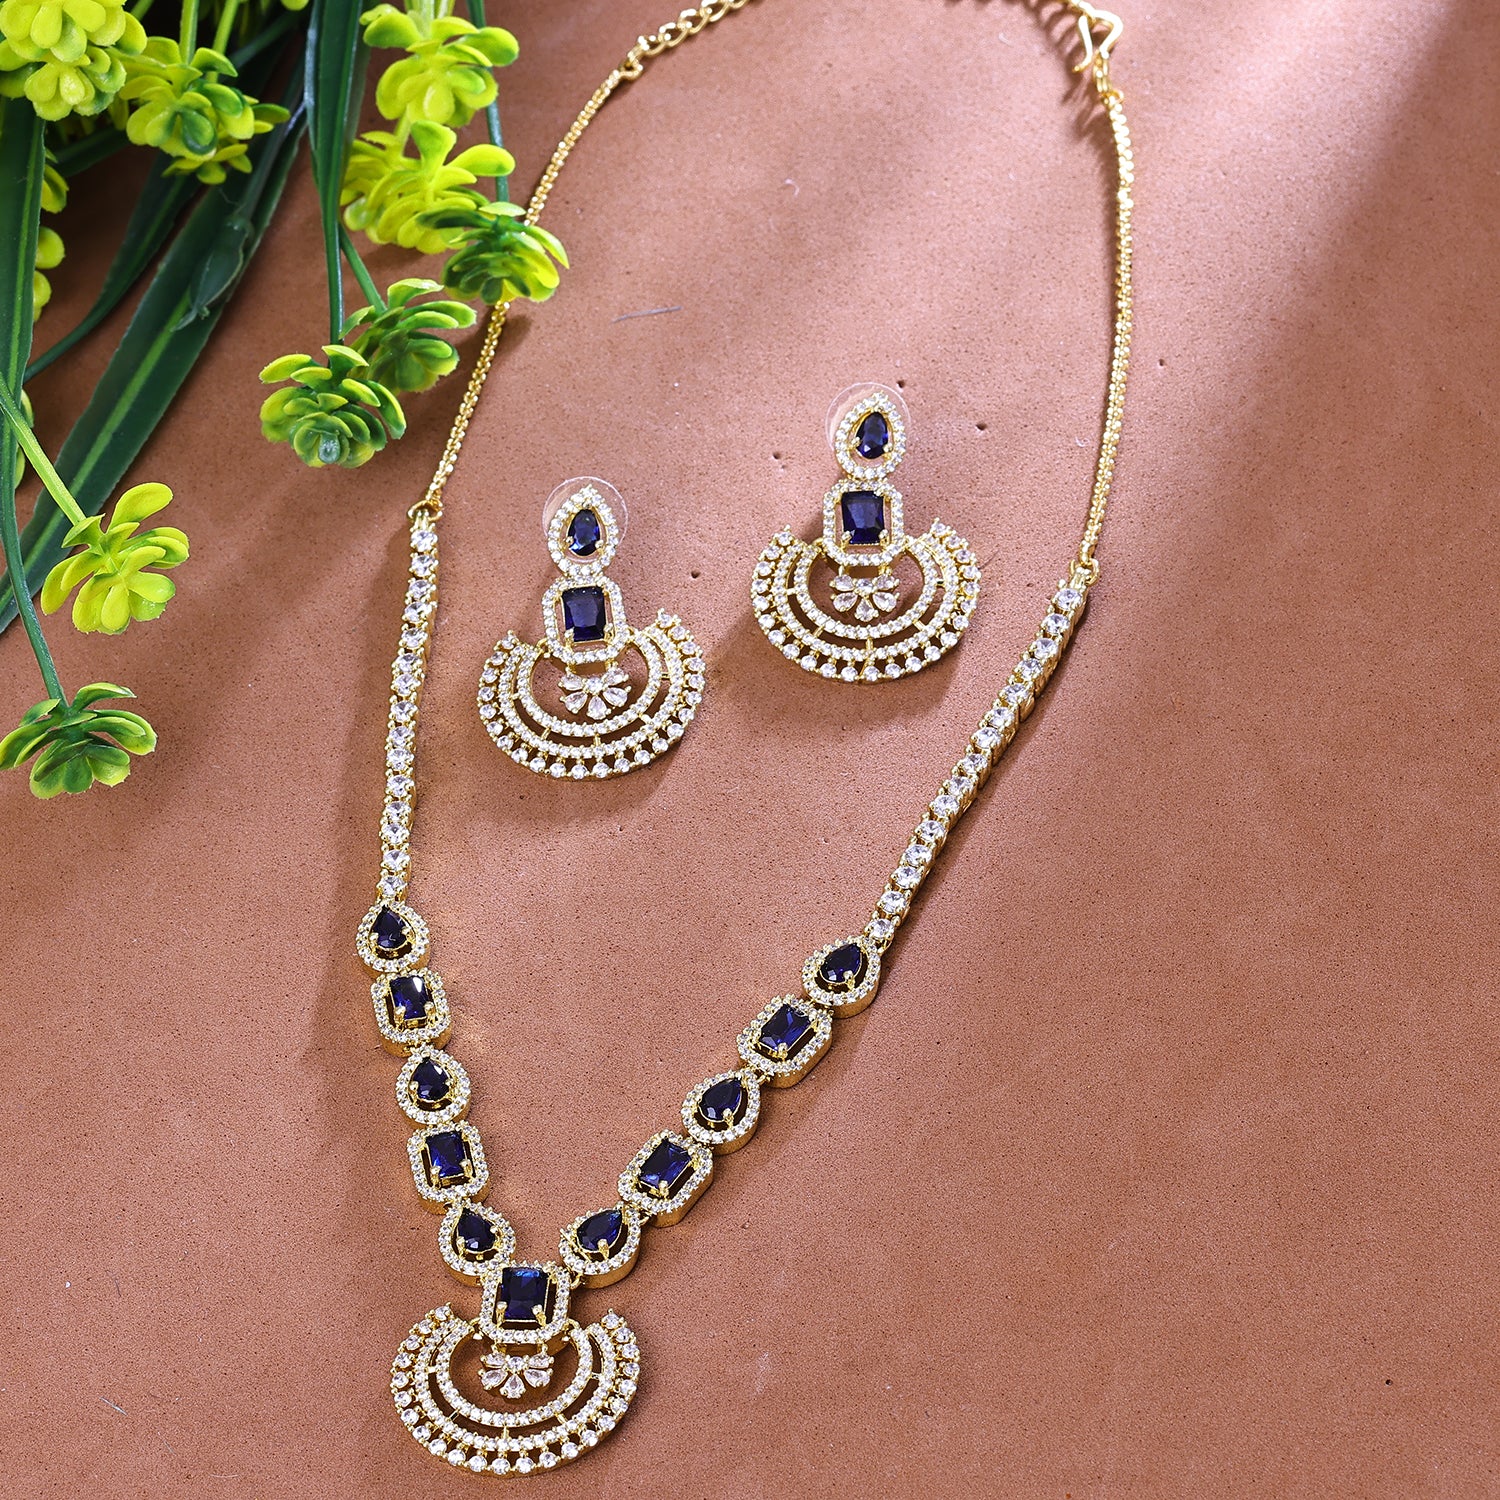 Buy Imitation Jewellery: Red Stone With Golden Touch Necklace Set